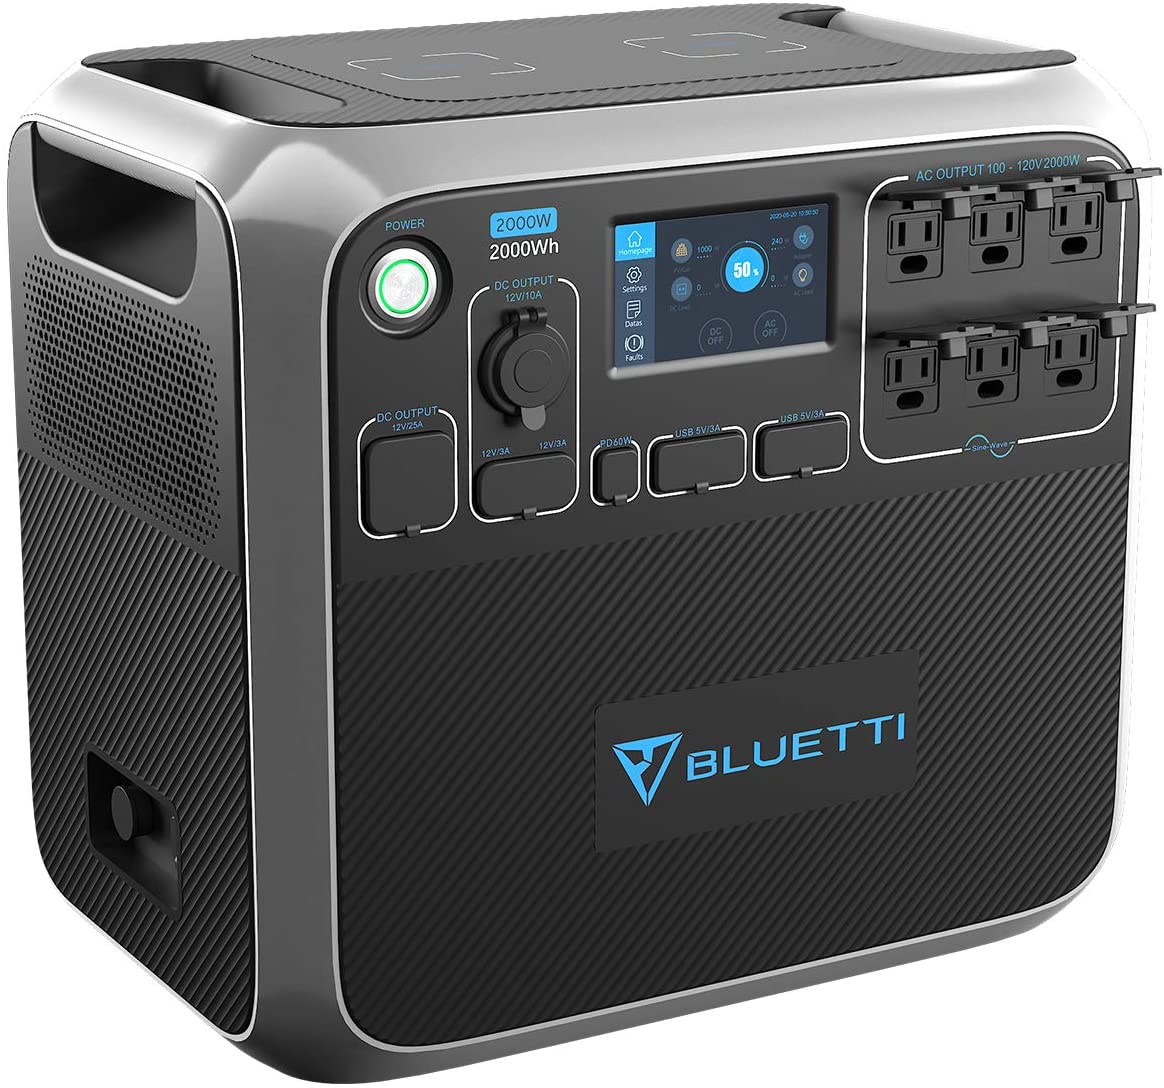 BLUETTI unveils three new products at CES including the world's first sodium-ion solar generator - Electrek